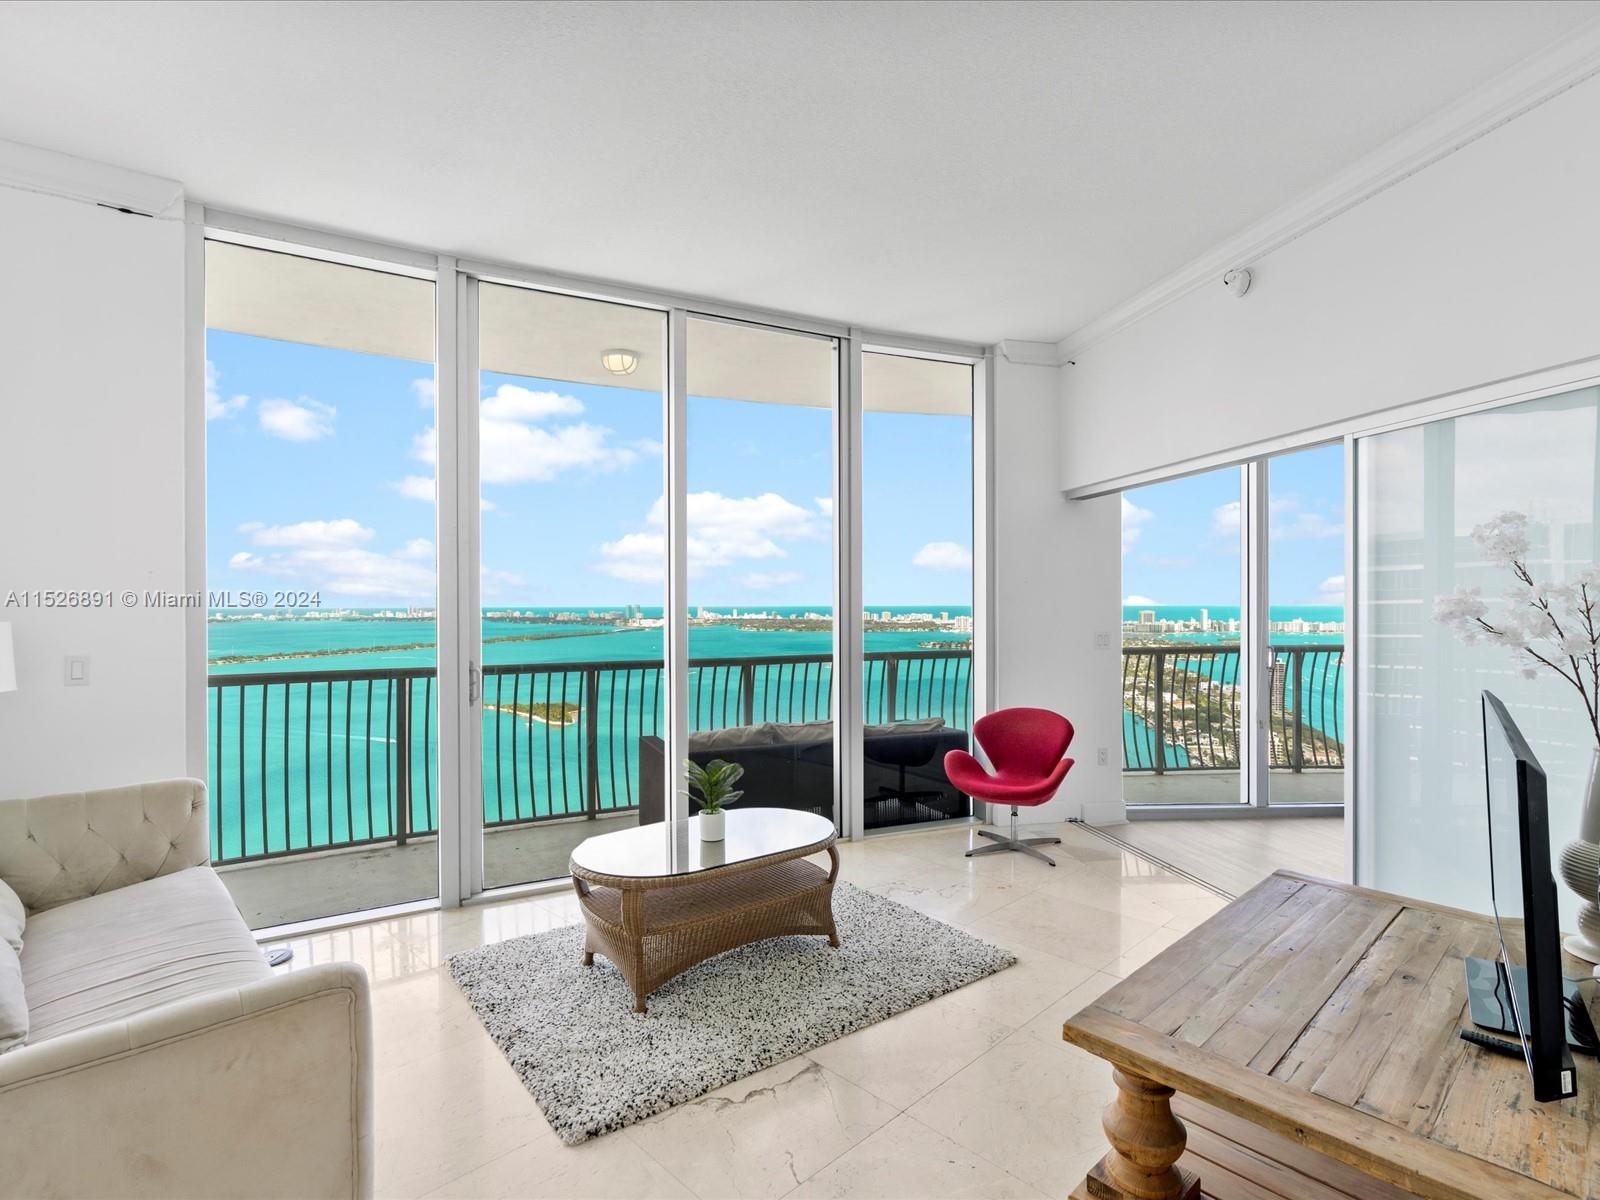 Now Available! Top floor Penthouse unit on 56th level in the coveted '01 line. Endless Eastern views of Biscayne Bay & Miami Beach. Furnished or unfurnished 2 bd/ 2 ba, 12-foot high ceilings, washer/dryer in unit, & premium parking space on 2nd level. The Opera Tower has a new state-of-the-art fitness center & pool, facial recognition entry, 24 hr Mini Market, wine market, barber shop, restaurant and bar on-site, 24/7 Valet, & Security. Outside your front door is Pura Vida, Cassadonna, and Margaret Pace Park w/ Tennis, Volleyball, Basketball, Jogging Path, Dog Park, BBQ, etc. In popular Edgewater area, minutes from Downtown, Arts & Entertainment District, Wynwood, Midtown & Design District, 10 min to South Beach & steps to pedestrian-friendly Venetian Causeway. No Short Term.